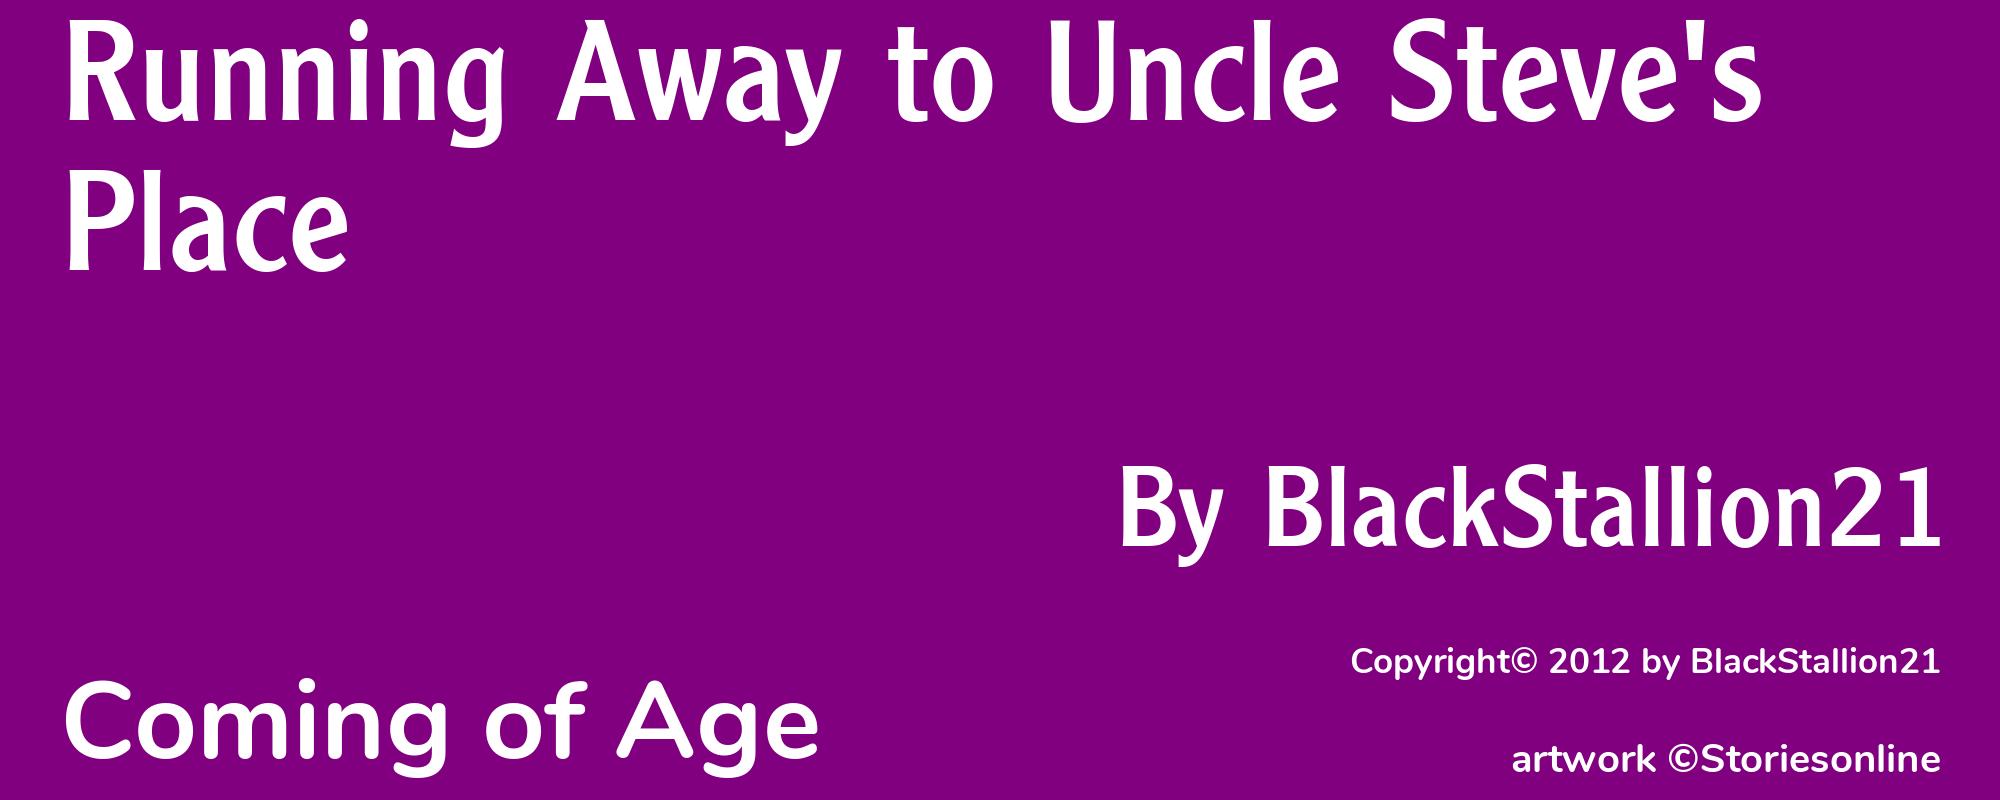 Running Away to Uncle Steve's Place - Cover